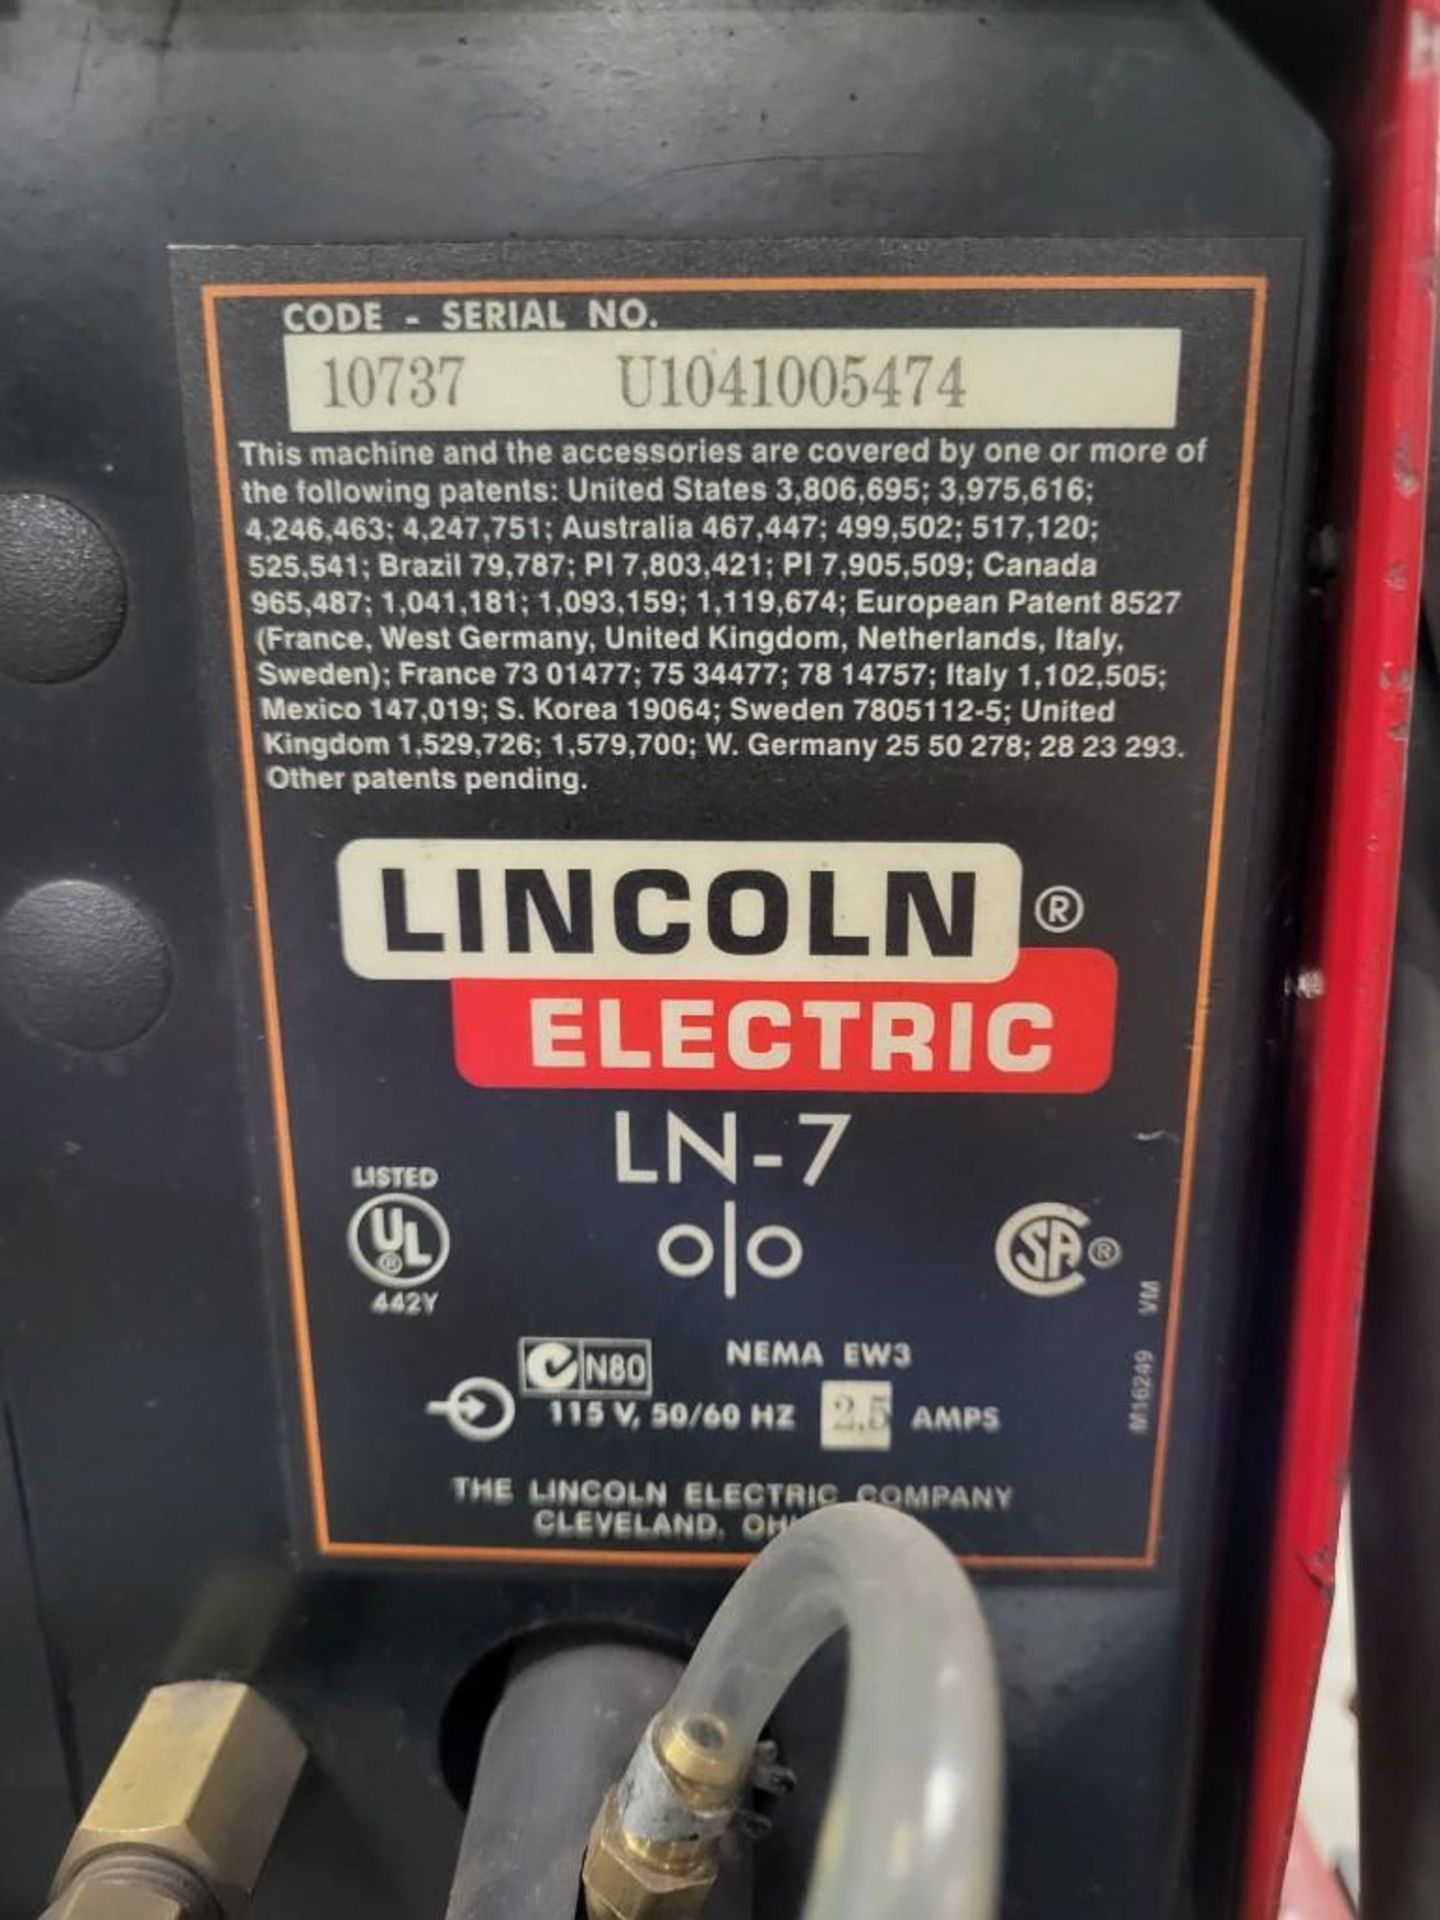 LINCOLN ELECTRIC CV-300 MIG WELDER WITH LN-7 WIRE FEEDER - Image 8 of 11